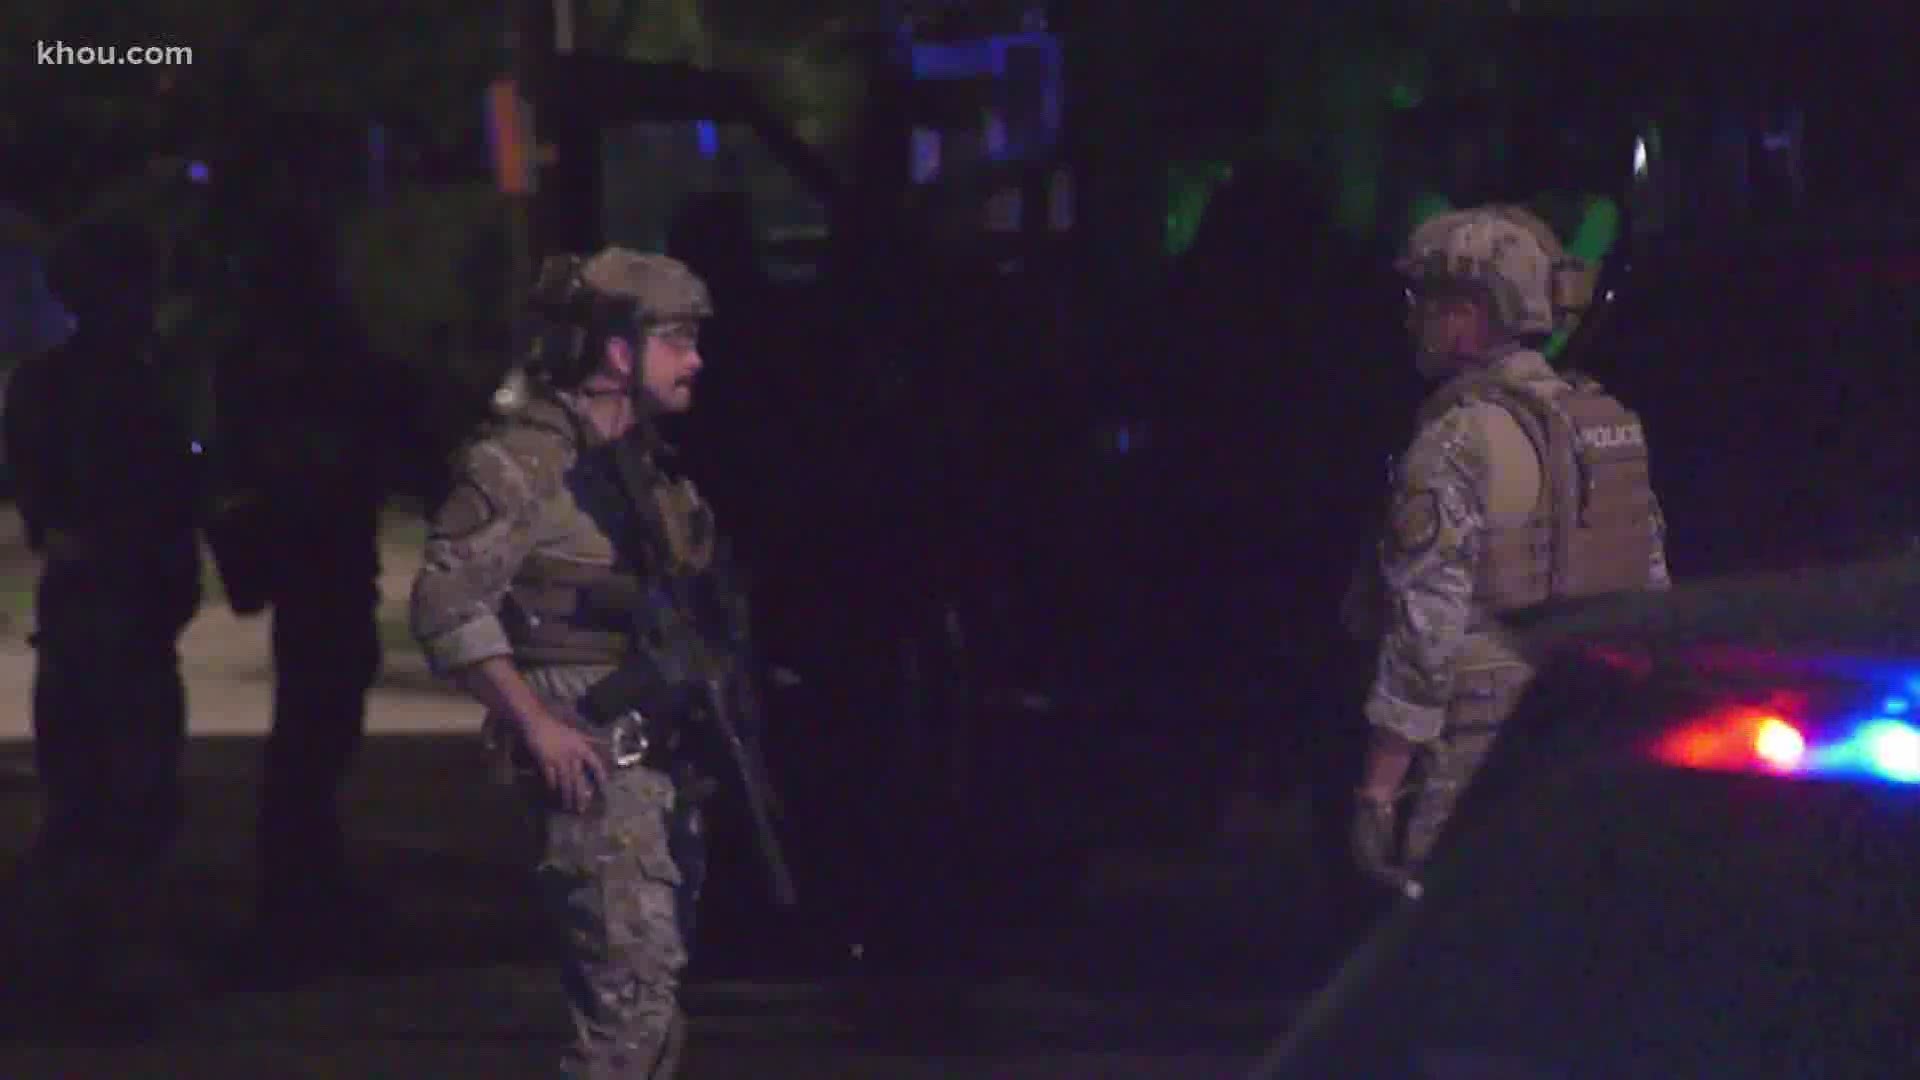 A woman arrested and charged with assault after a standoff with SWAT officers at a home in southwest Houston.